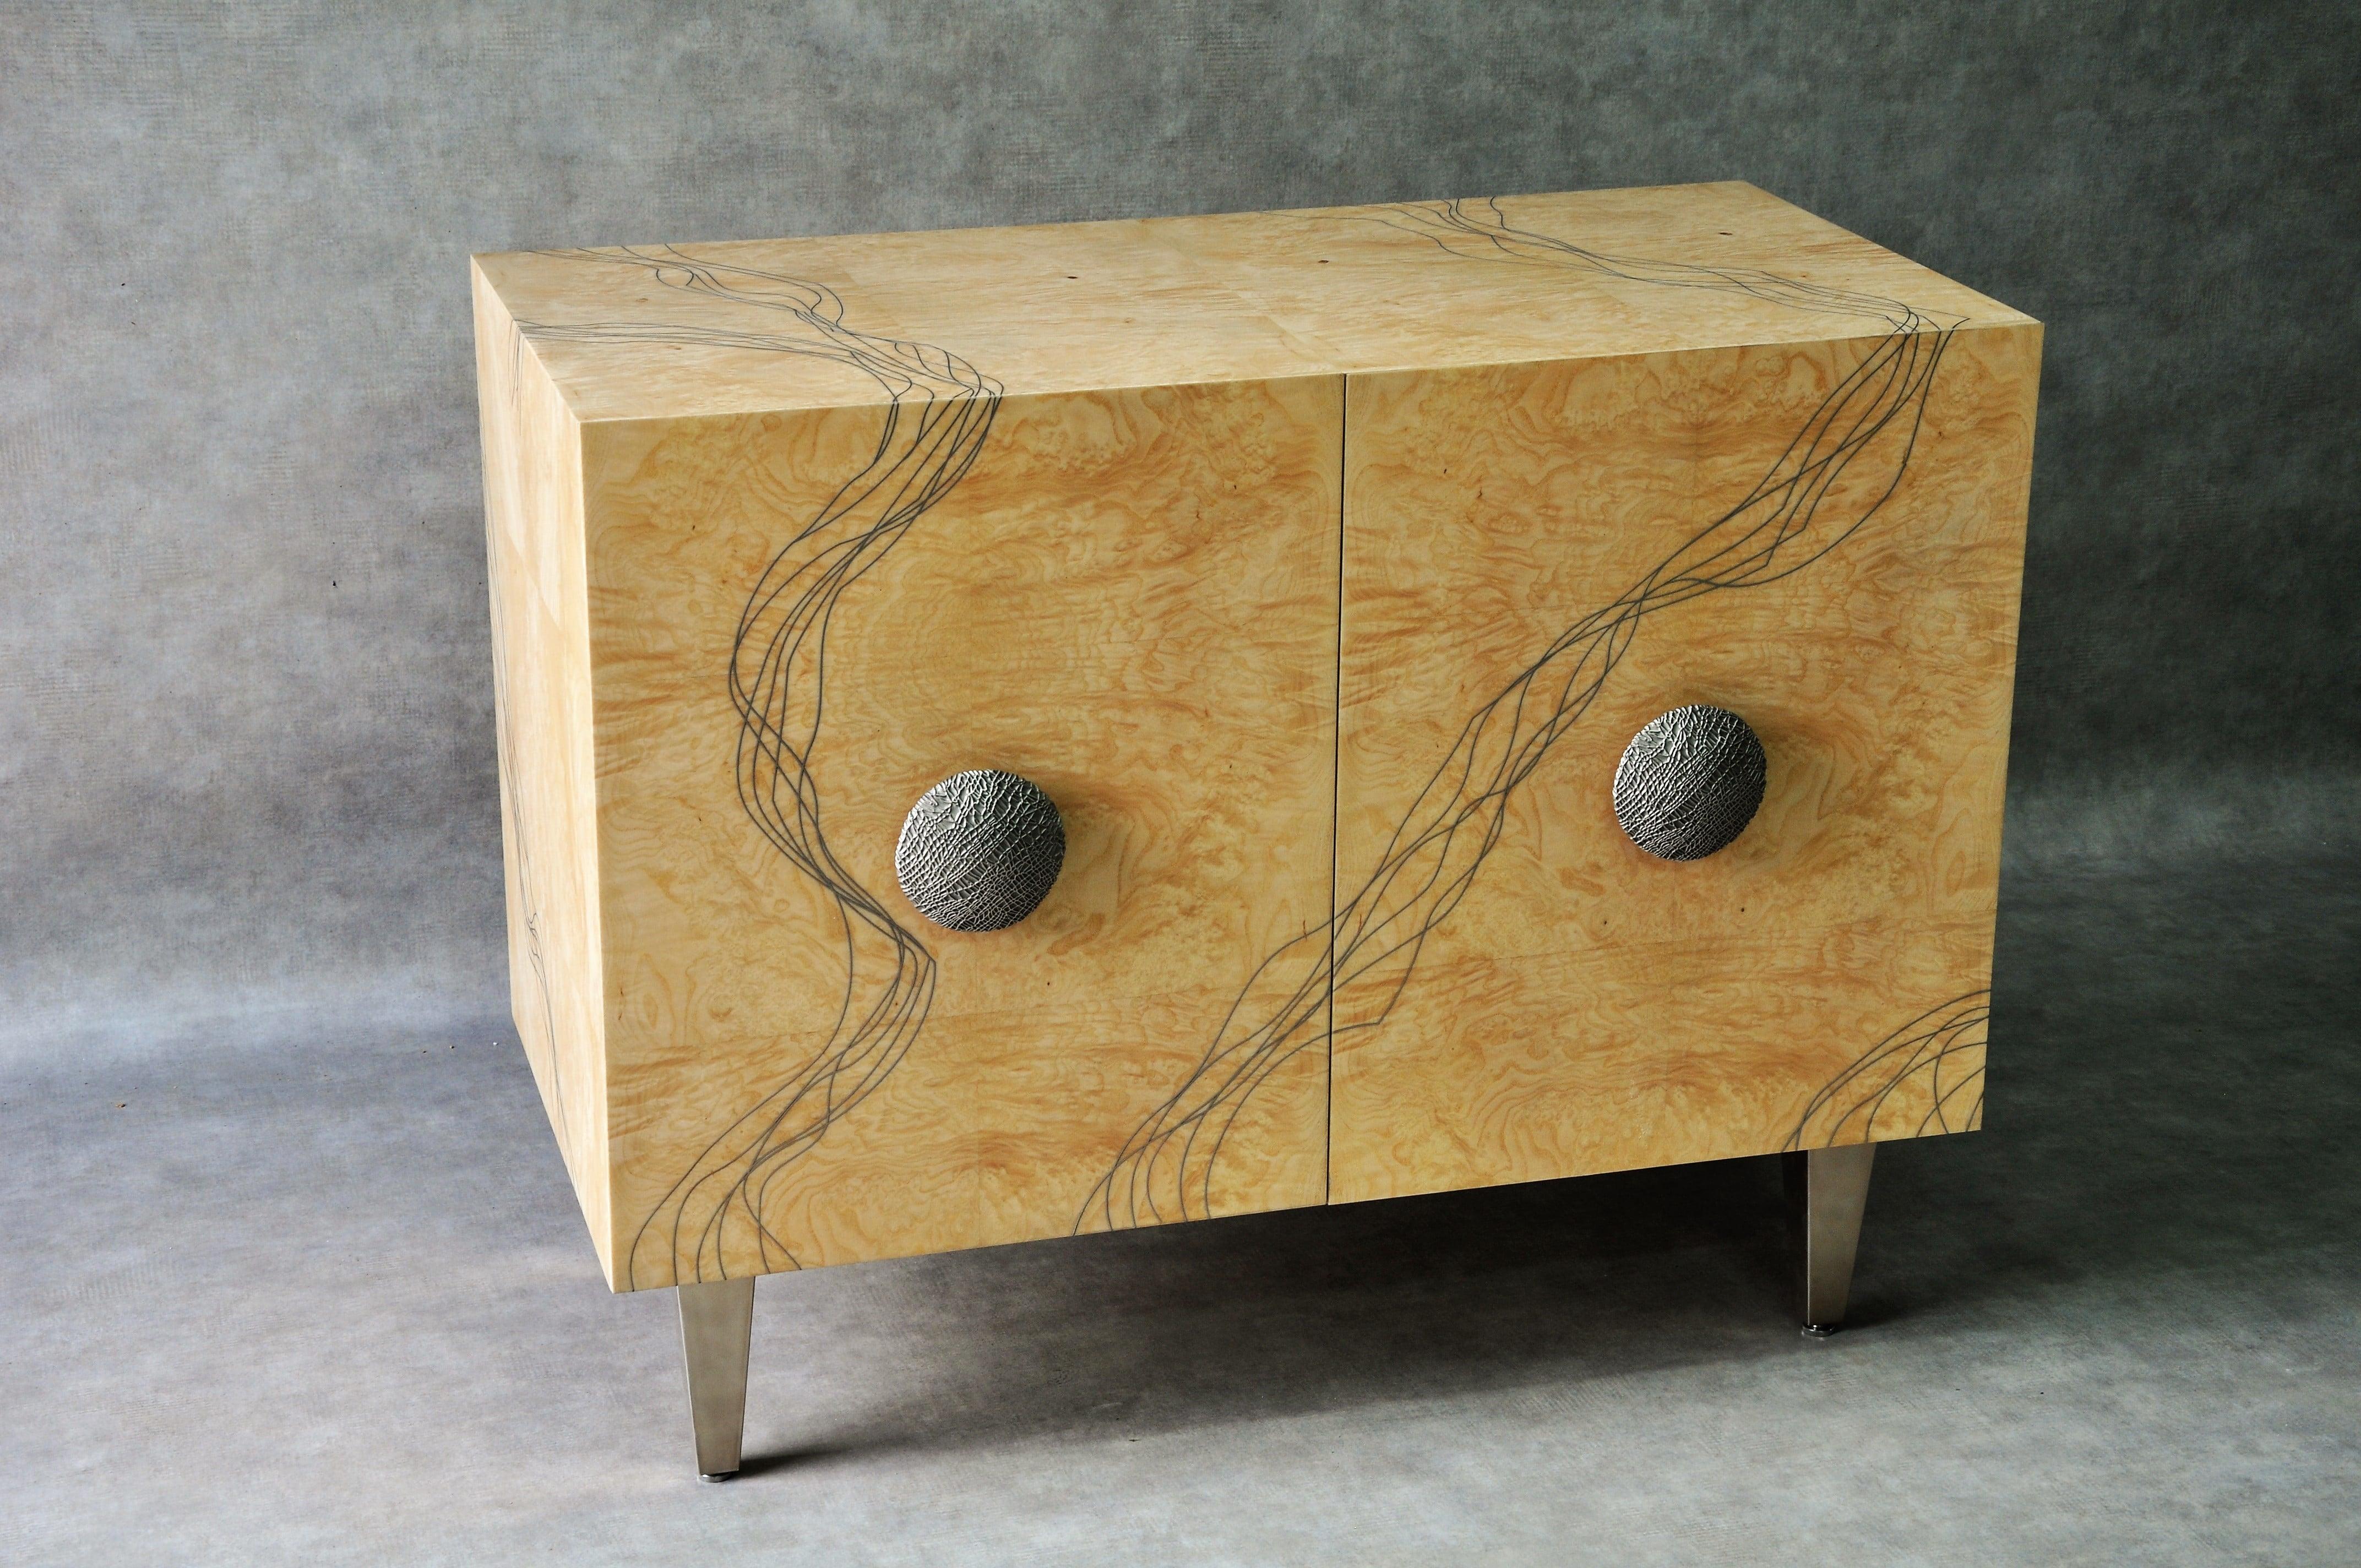 The Entrelacs sideboard is a unique item that encapsulates Frédérique Domergue's virtuosity in combining metal (here, polished titanium) and rare woods (burl ash). The interlaced patterns set into the veneer cover the entire cabinet (front and back)